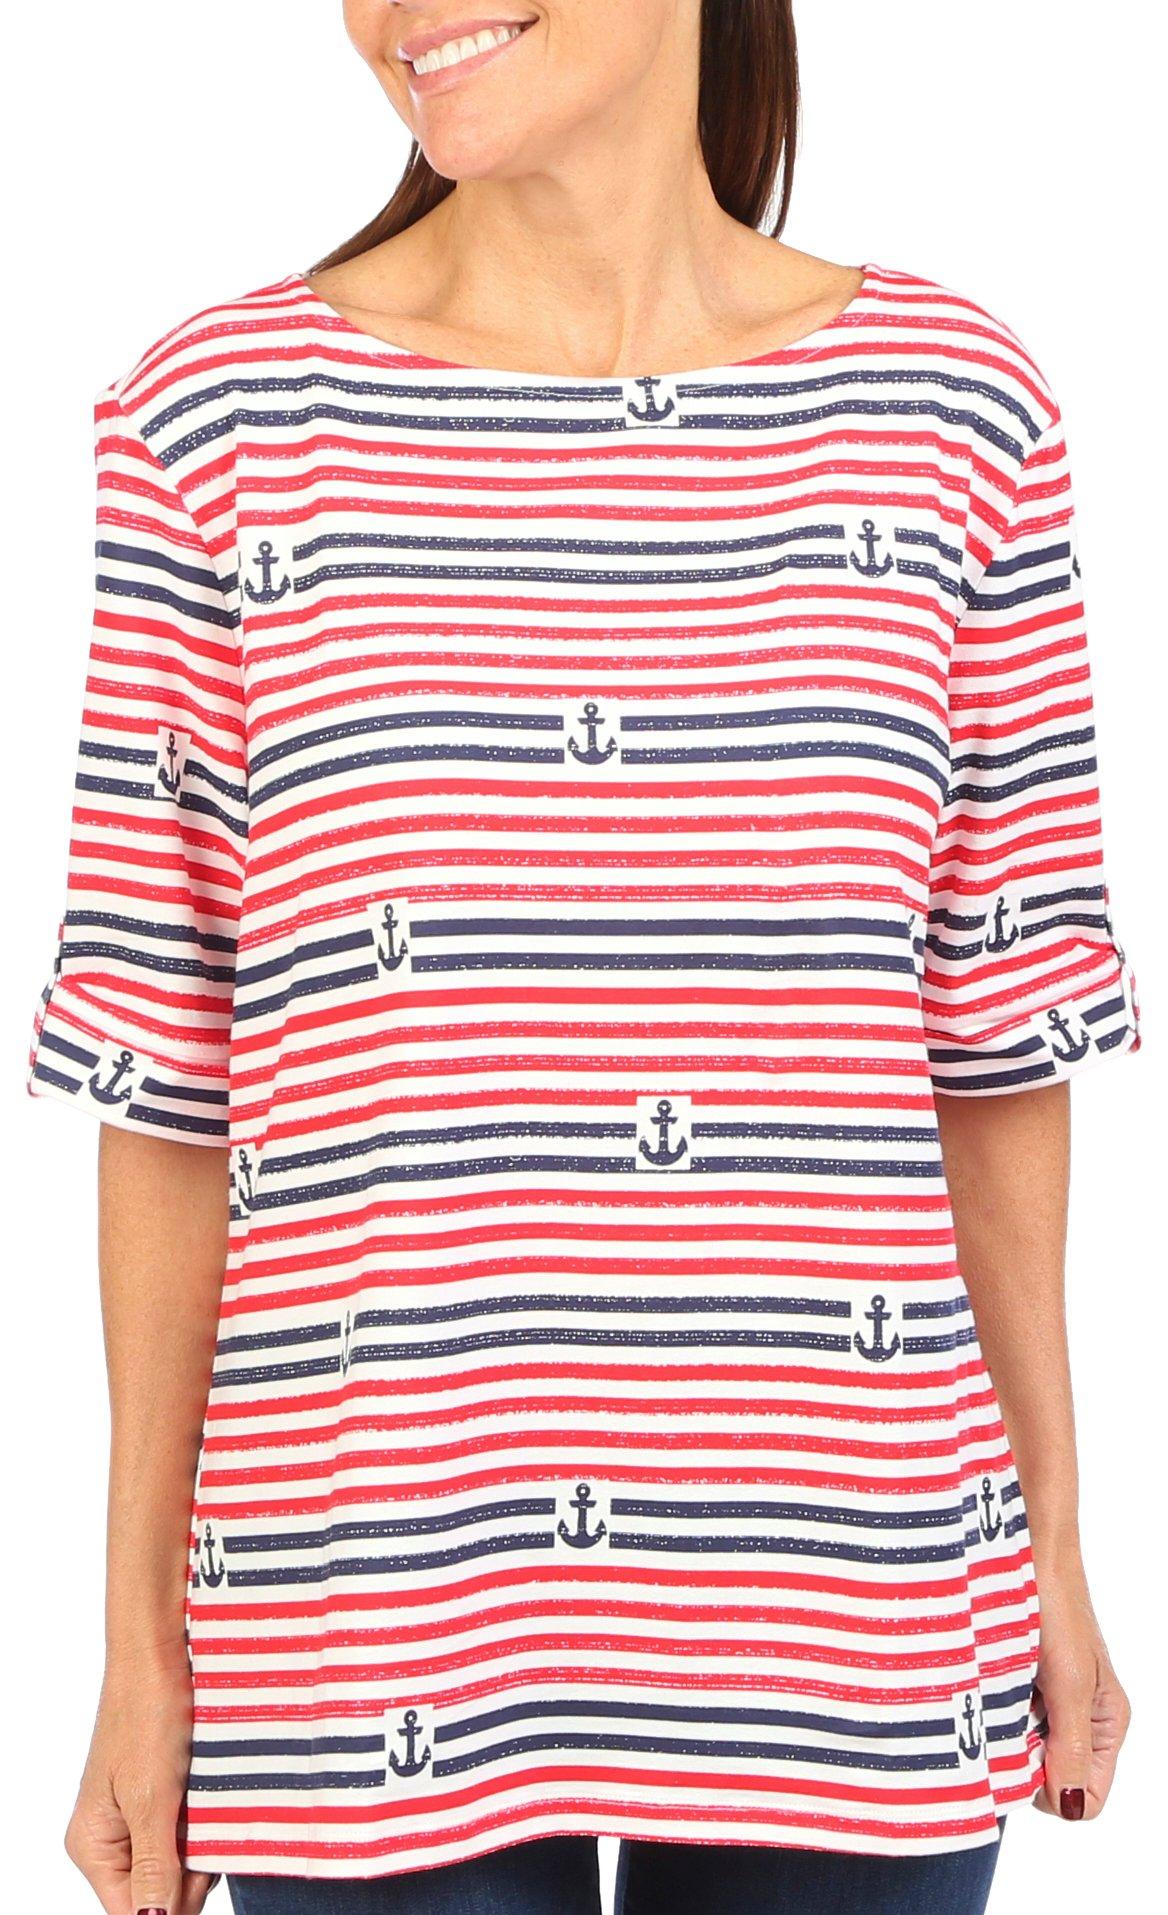 Coral Bay Petite Anchor & Stripes Boat Neck Short Sleeve Top